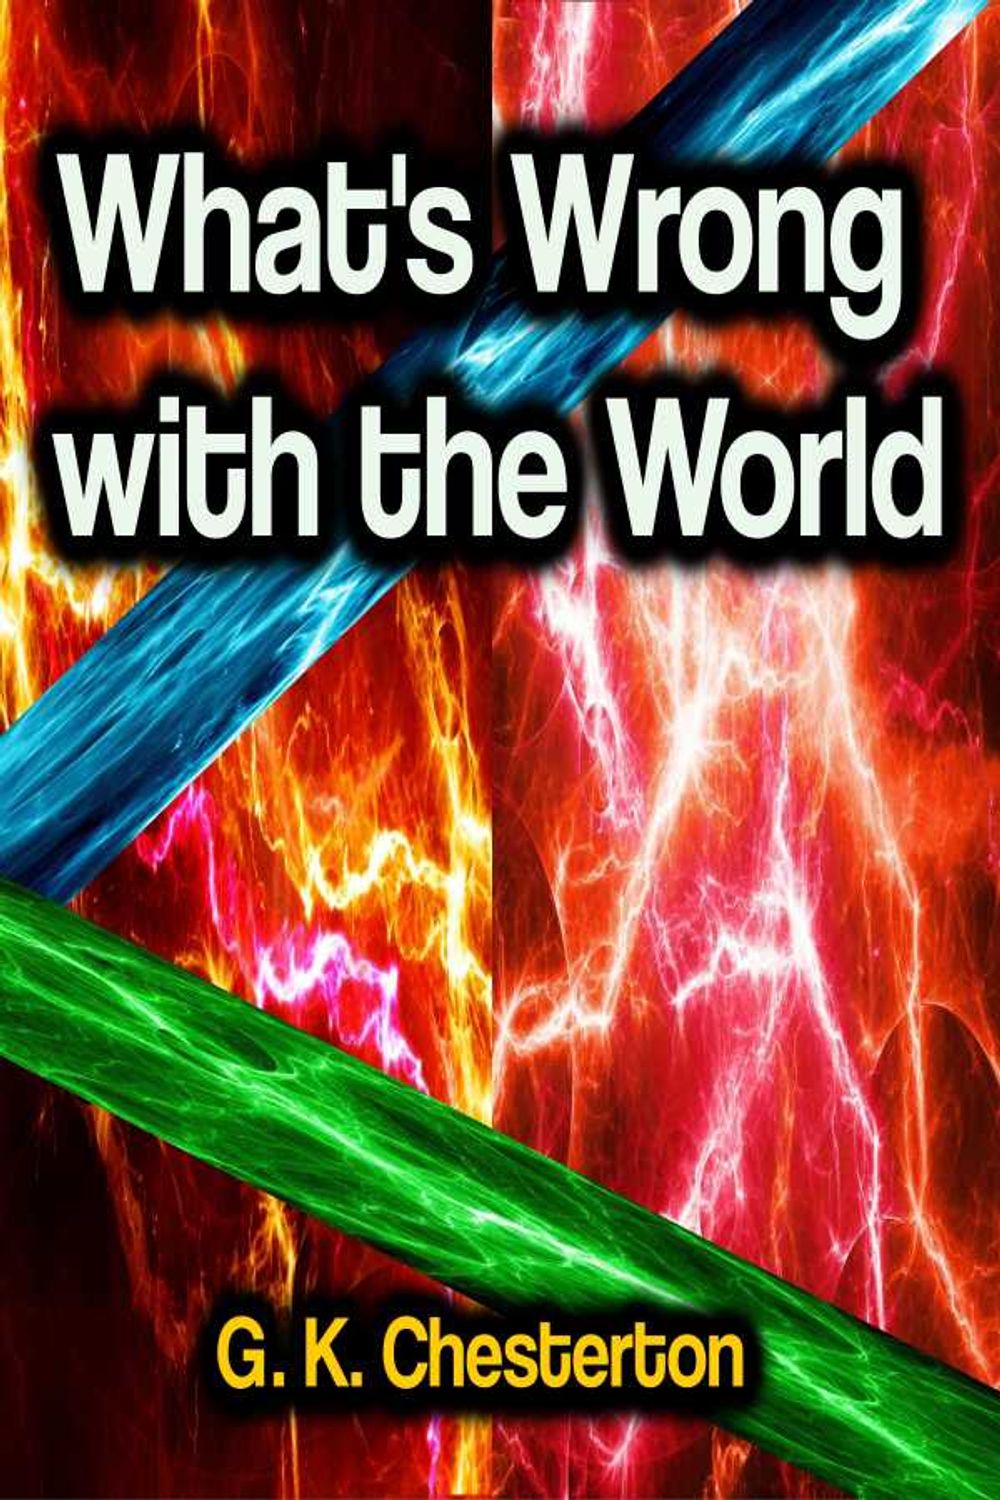 bw-whats-wrong-with-the-world-phoemixx-classics-ebooks-9783986477462